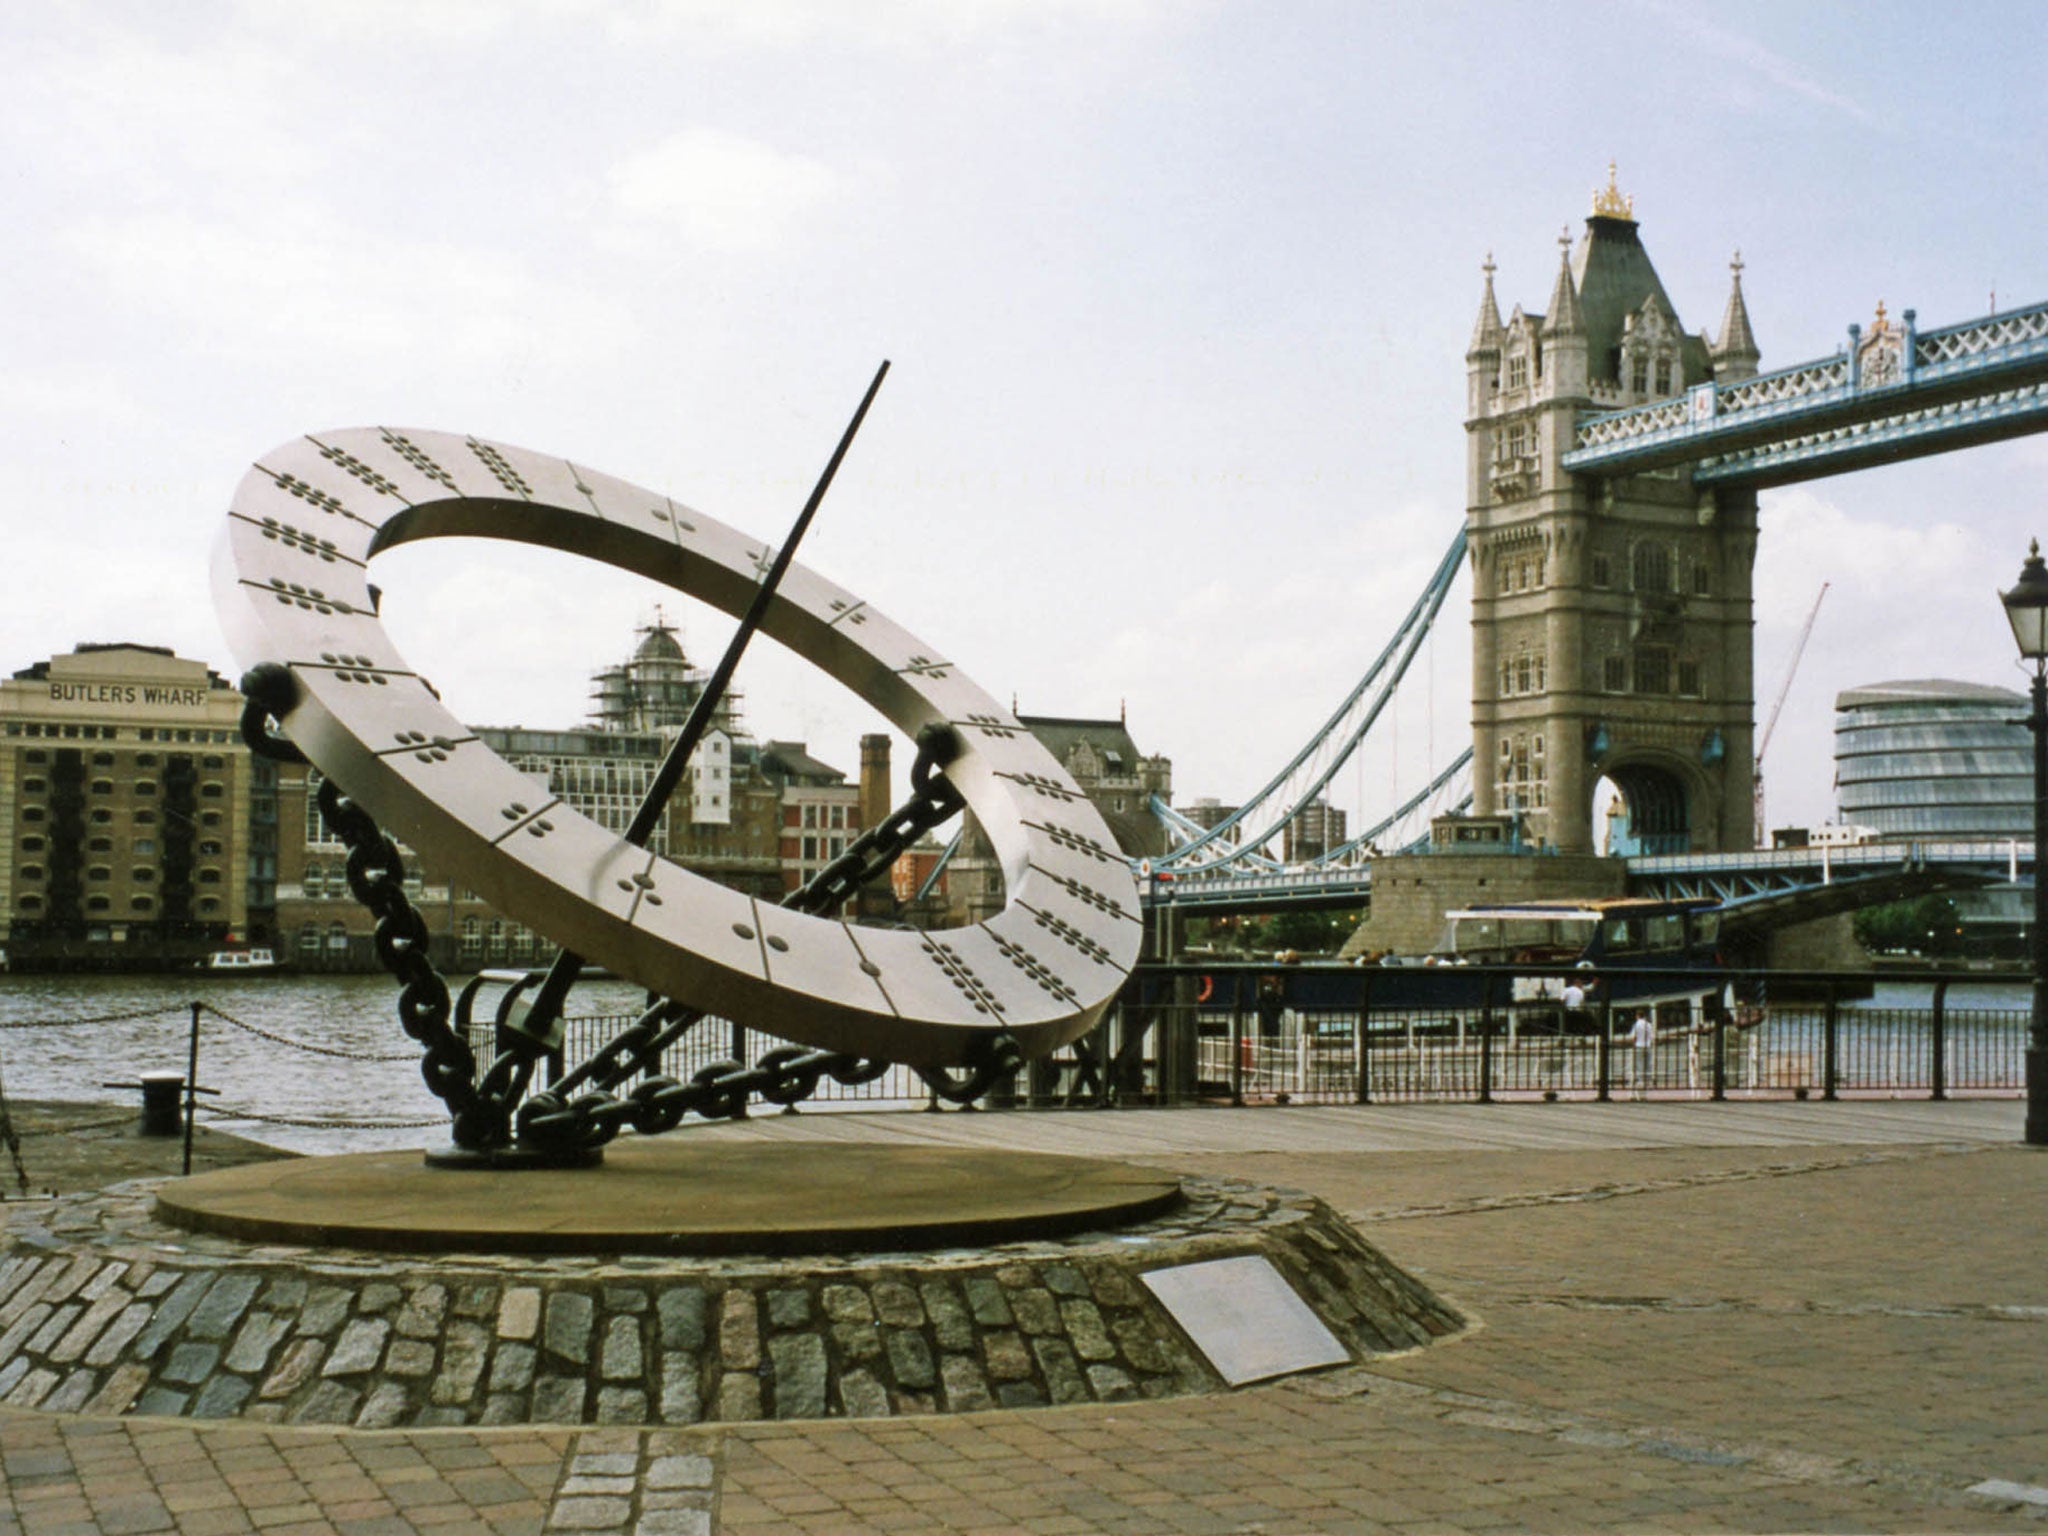 Wendy Taylor CBE's sculpture Timepiece seen by Tower Bridge in London